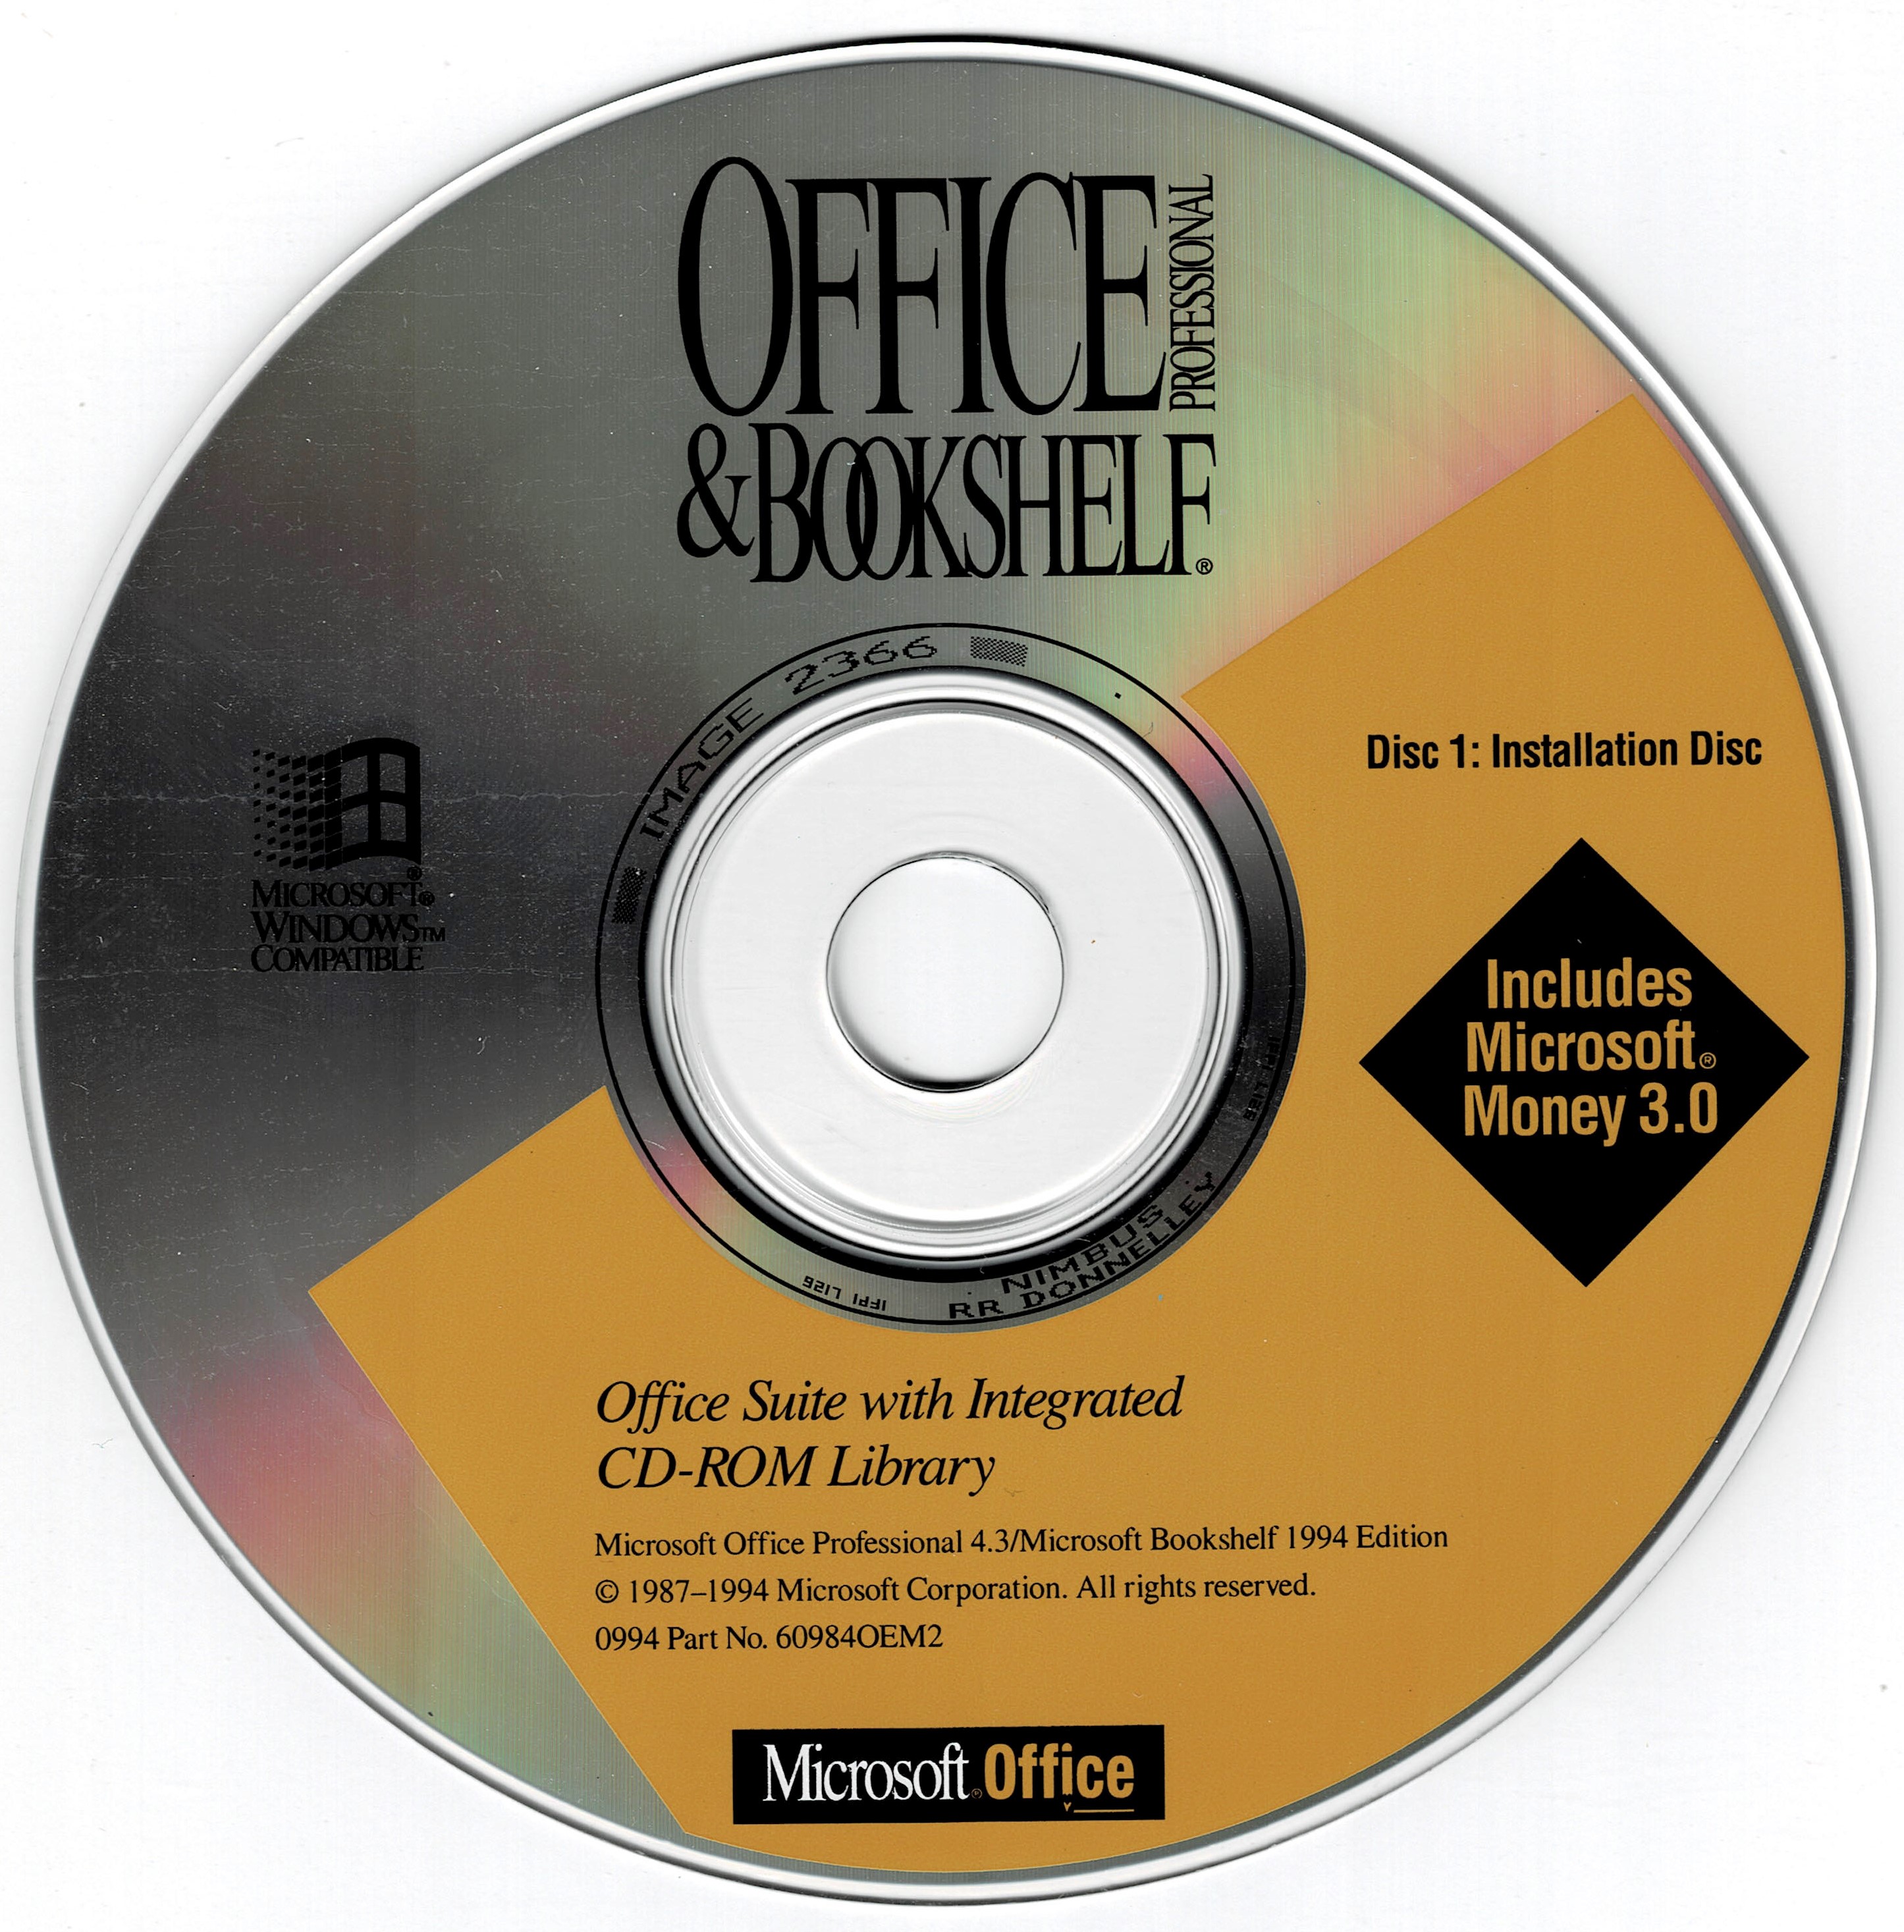 Microsoft Office 4.3 Professional with Bookshelf 94 and Money 3.0